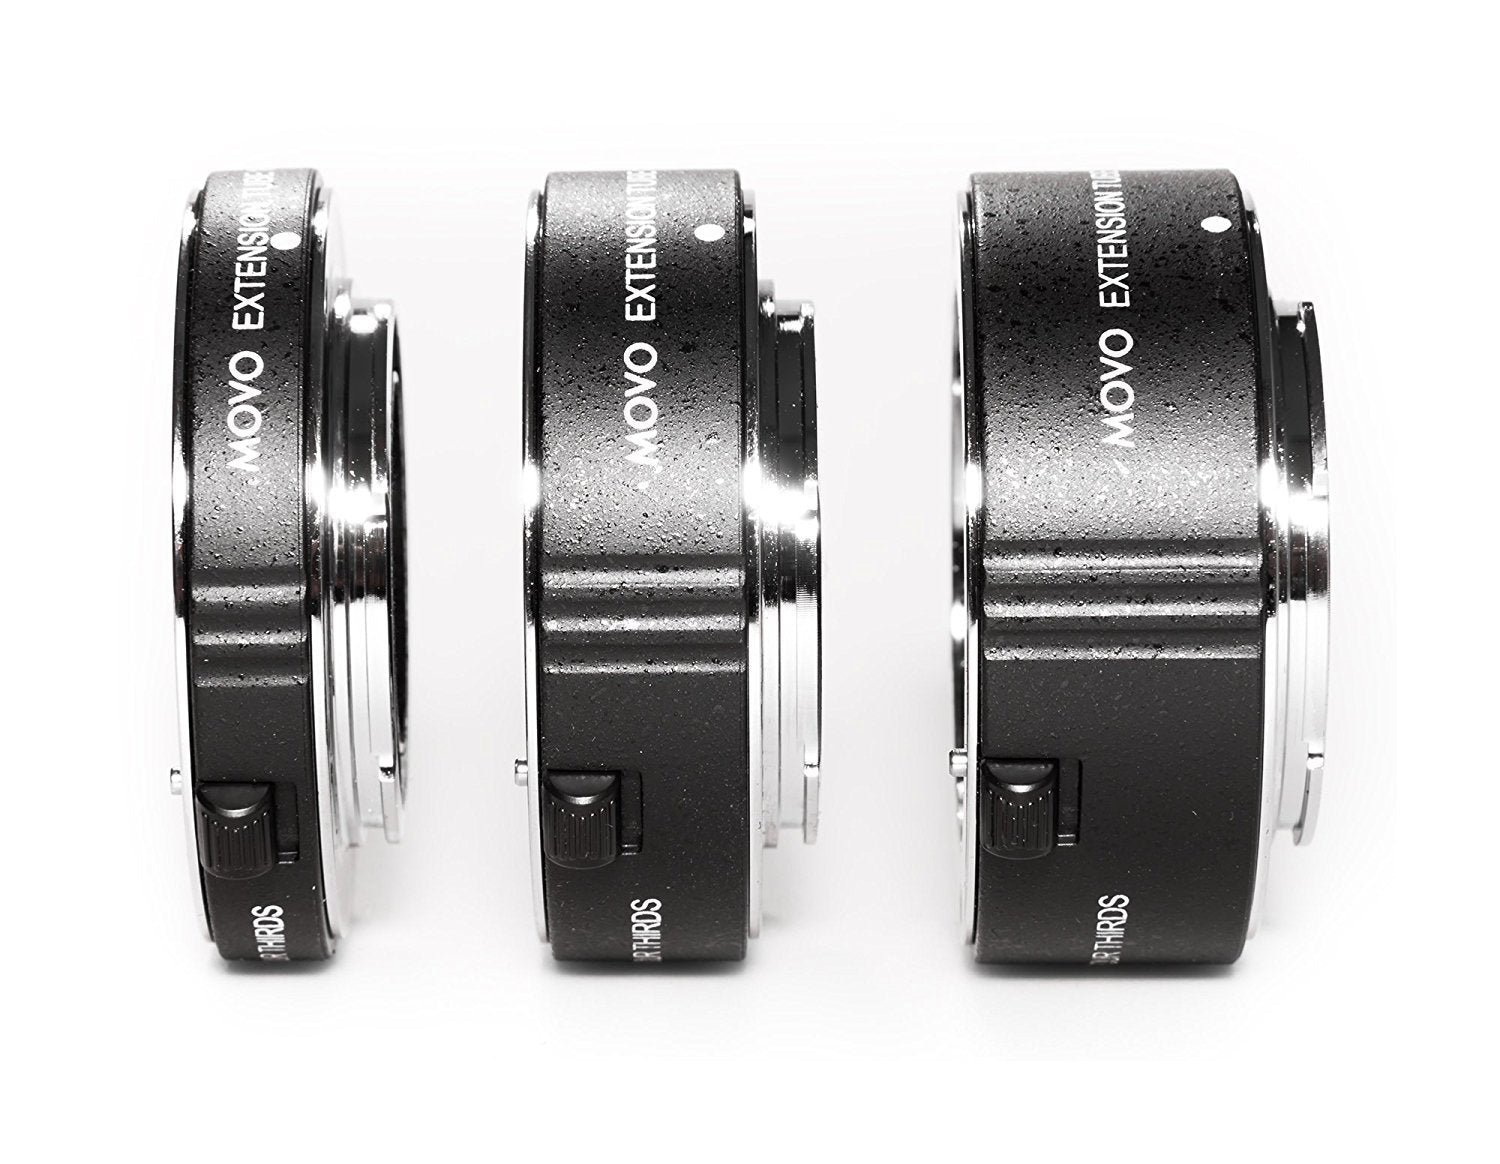 Movo/Kooka MT-CM47 3-Piece AF Chrome Macro Extension Tube Set for Canon EOS M, M2, M3, M5, M6, M10, M100 Mirrorless Cameras with 10mm, 16mm and 21mm Tubes  - Like New